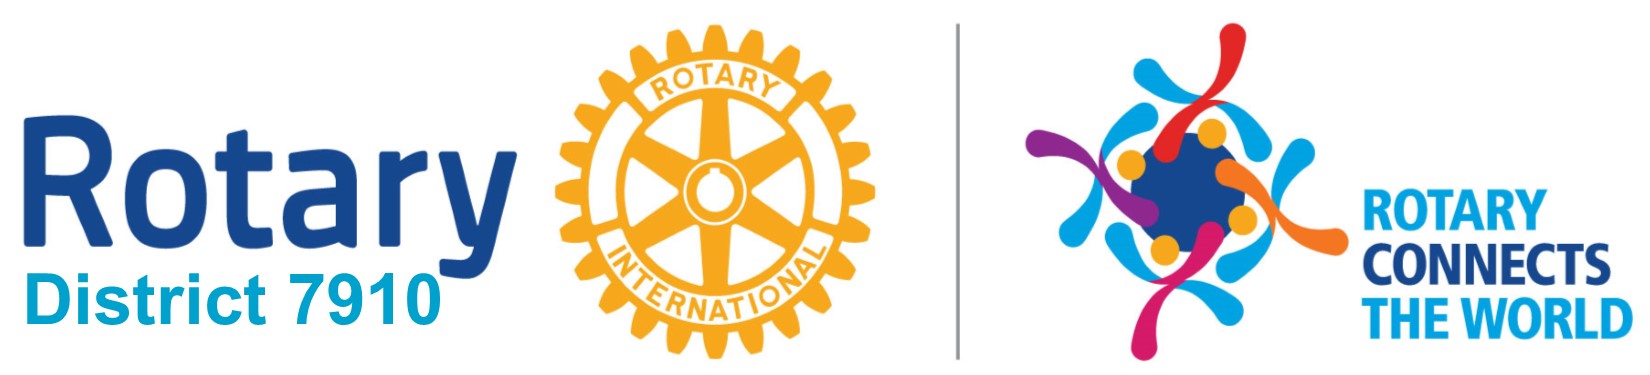 Home Page | Rotary District 7910